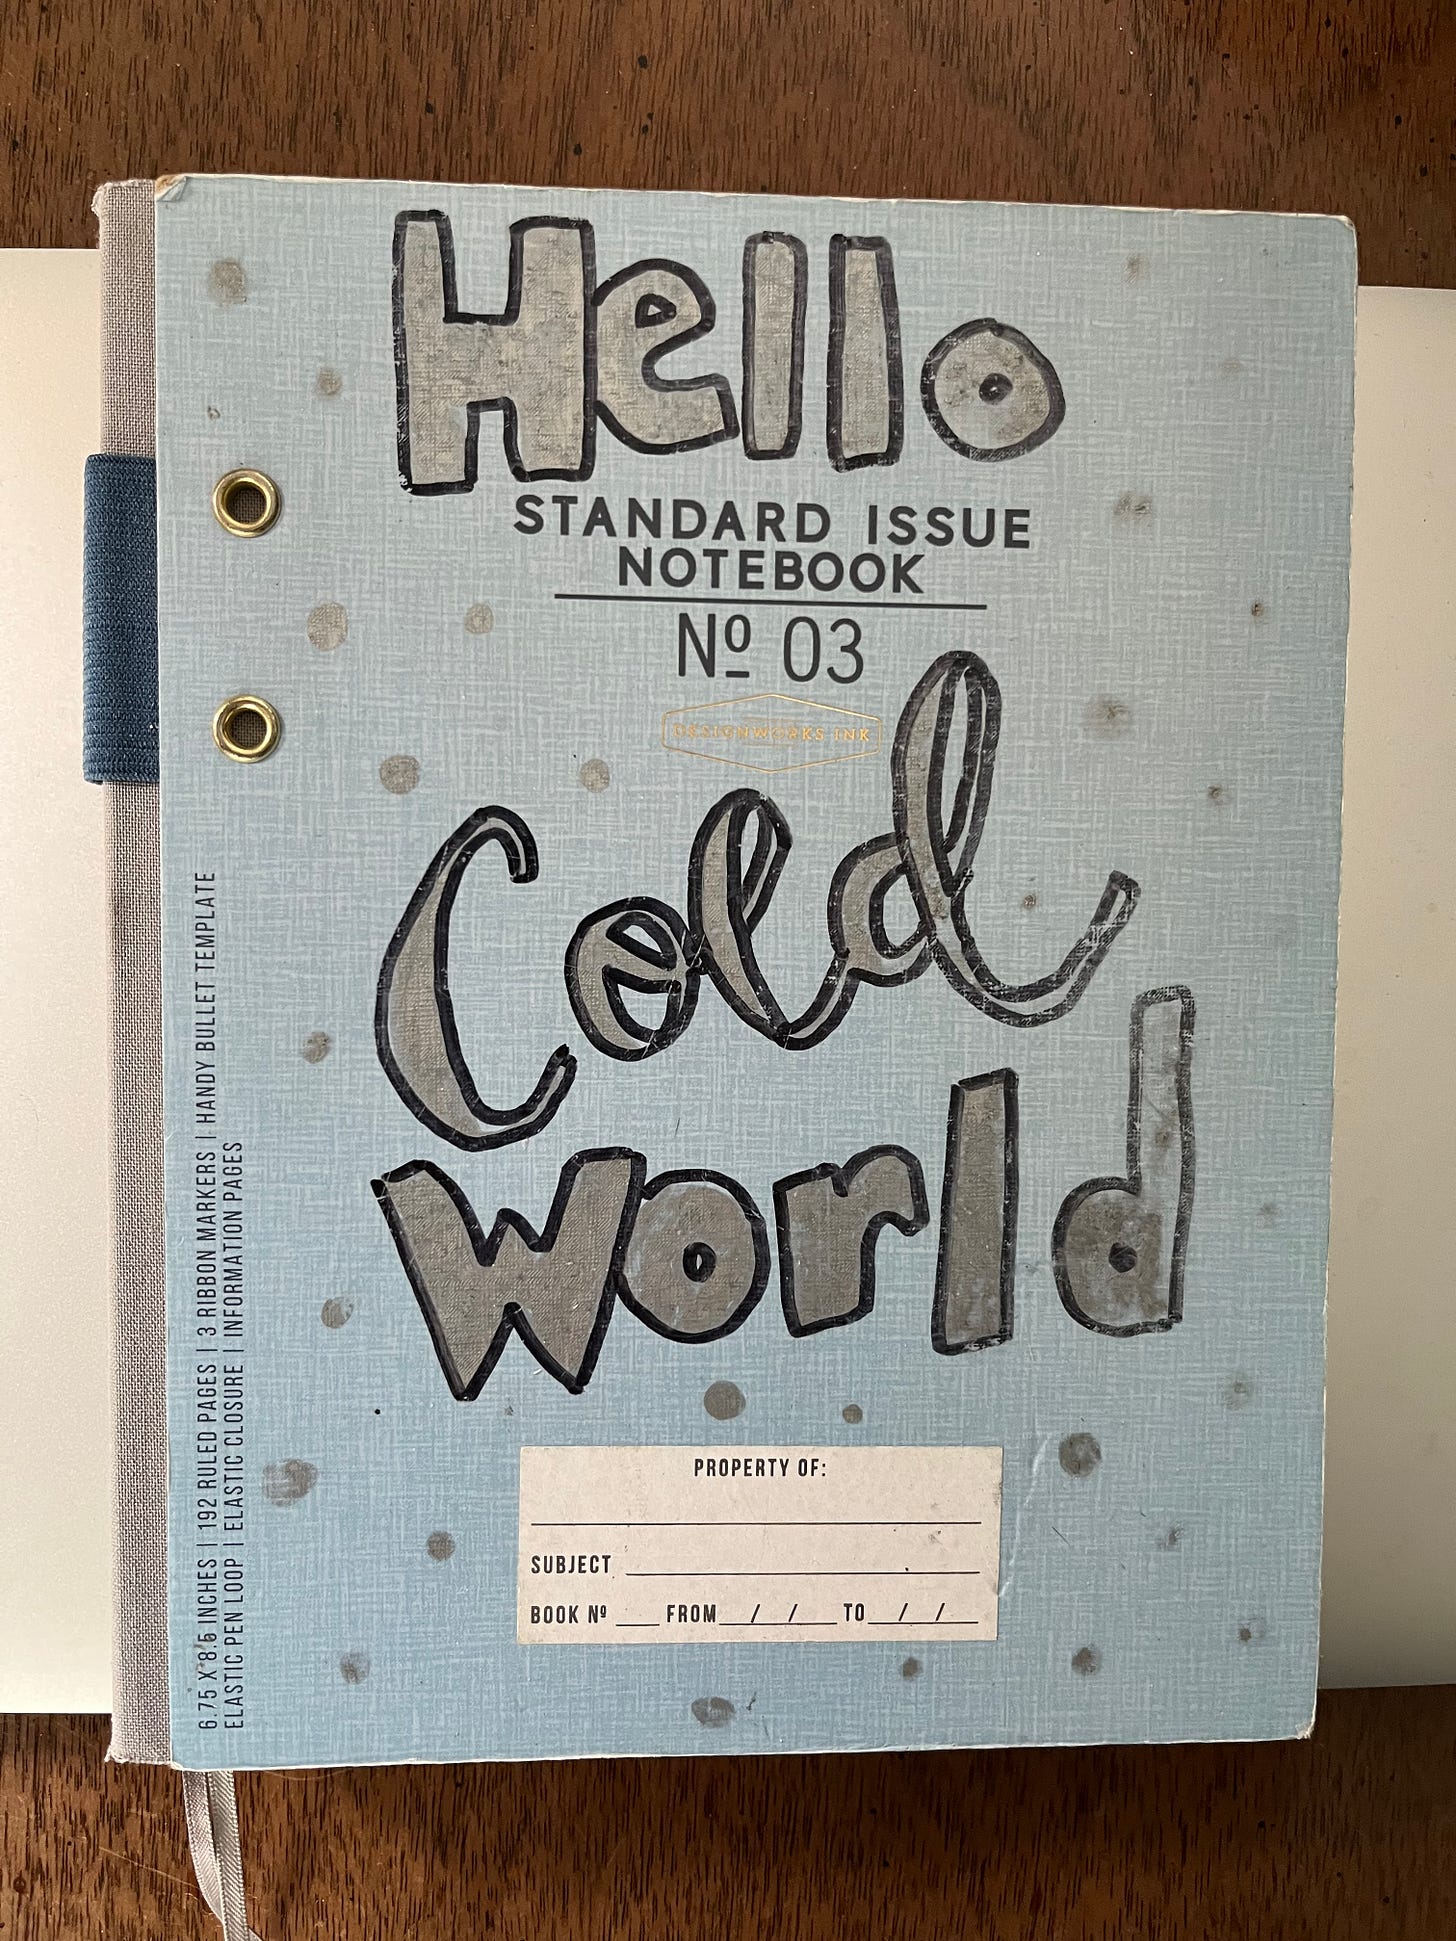 Picture of my Writing Notebook for With Love, from Cold World, that says "Hello Cold World" in silver sharpie on the cover with some little silver sharpie dots that are supposed to be like snowflakes